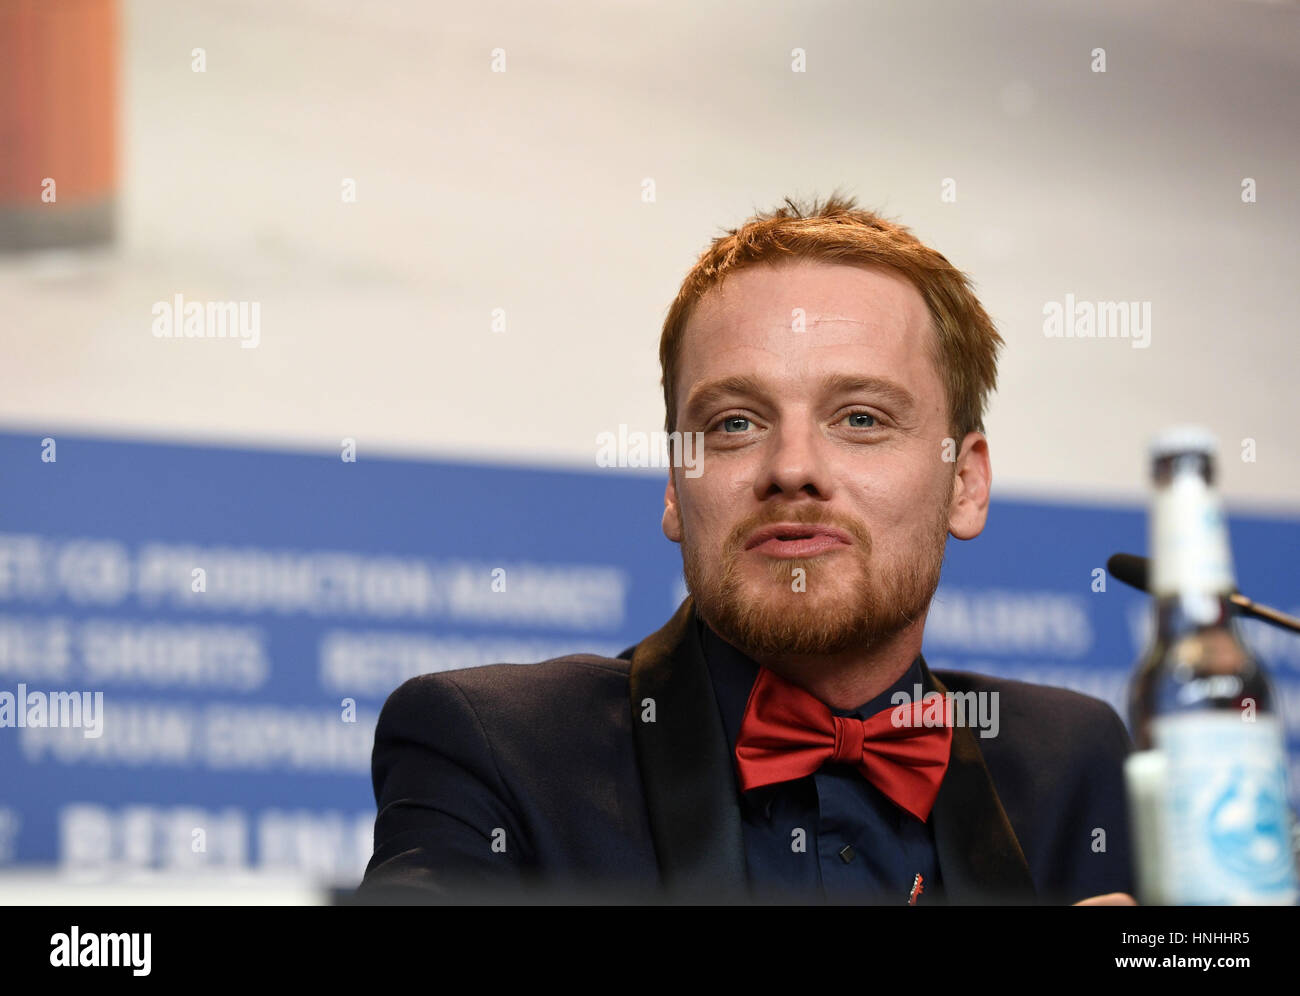 Berlin, Germany. 12th Feb, 2017. The actor Stefan Konarske speaks during the photo call of the film 'The Young Karl Marx' at the 67th International film festival in Berlin, Germany, 12 February 2017. The film will be aired in the section 'Berlinale Special'. Photo: Monika Skolimowska/dpa/Alamy Live News Stock Photo